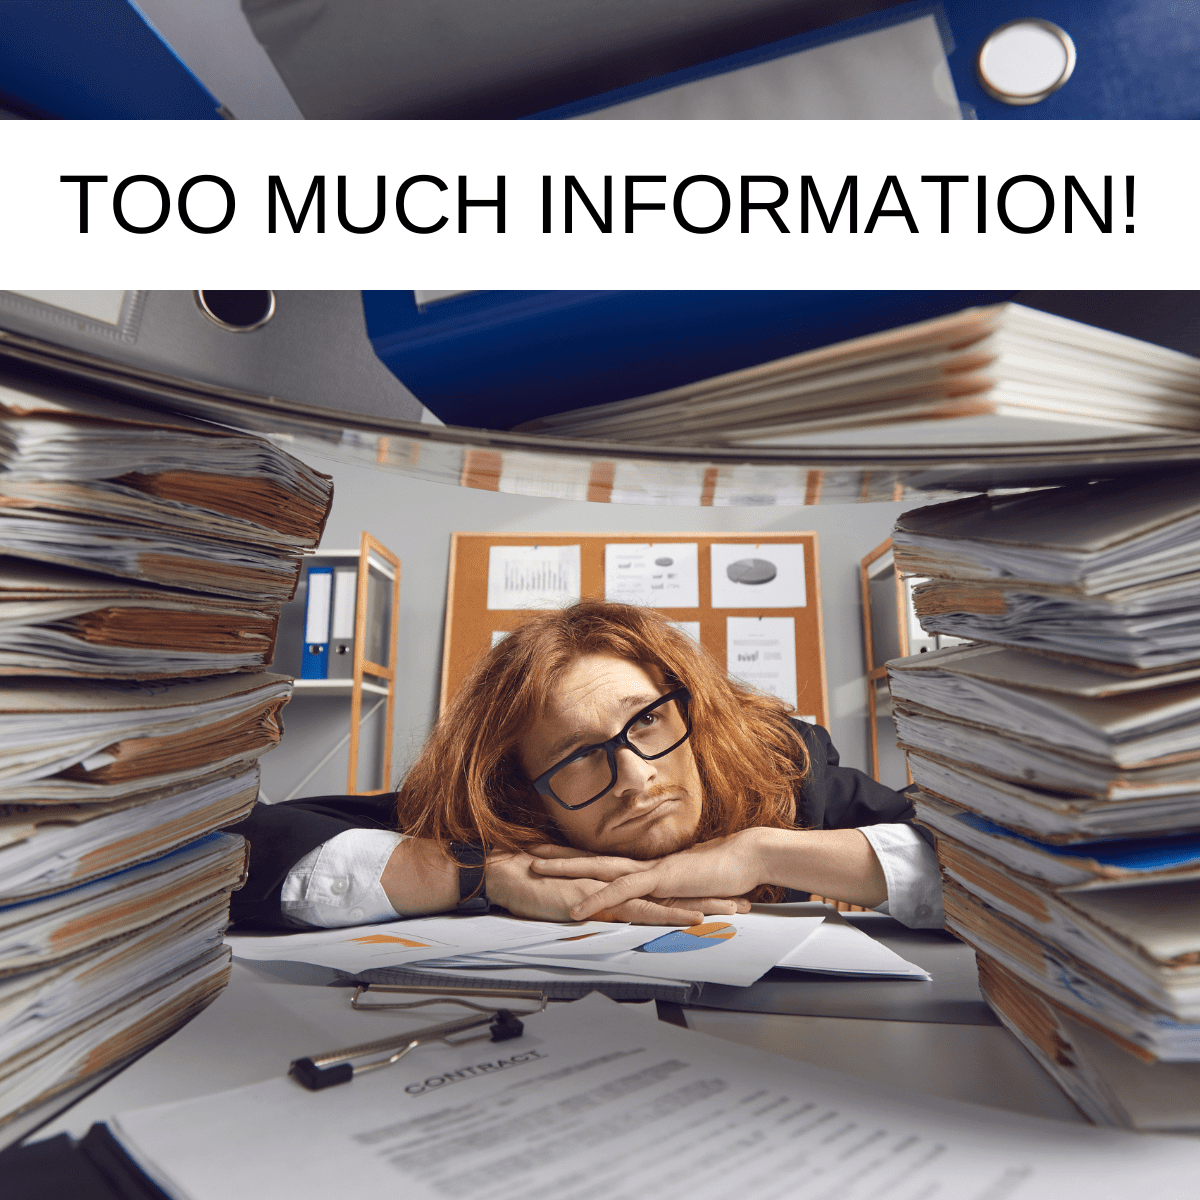 Too much information! How IT project process can get lost in the clutter